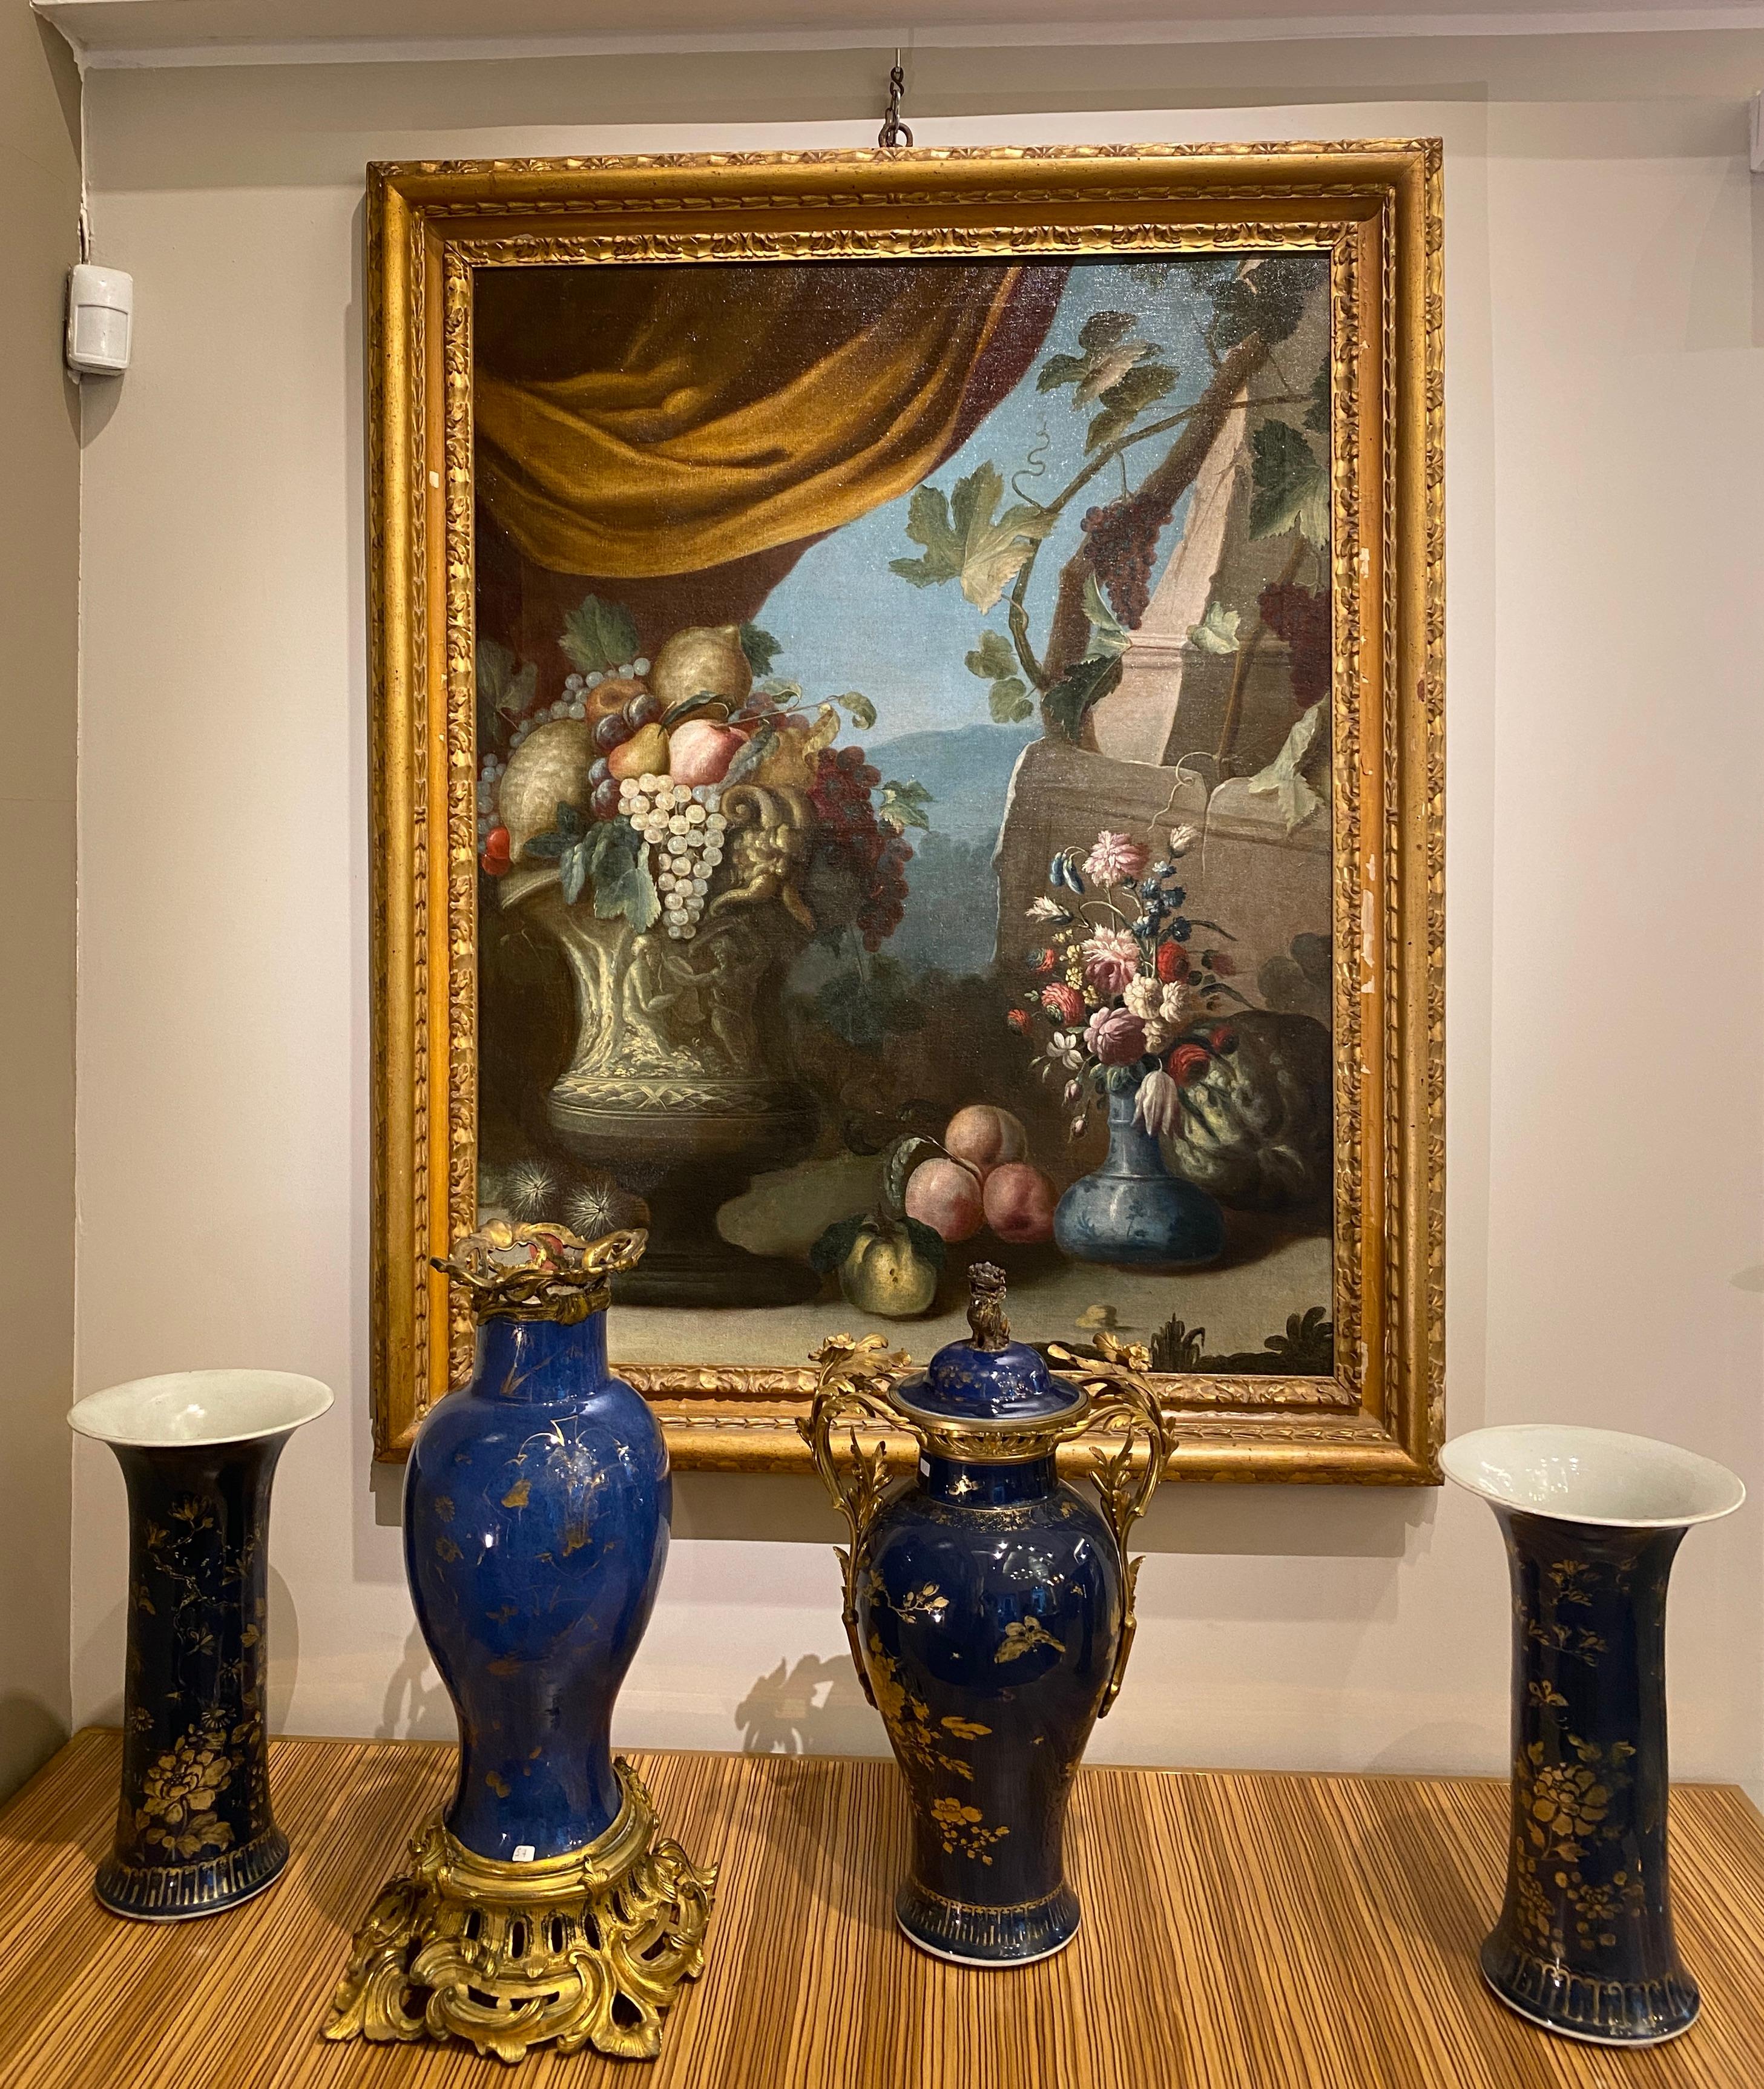 
This pair of excellent  Italian still life oil on canvas with flowers and fruit with classical ruins on the background and colored drapes create harmony of the composition. Notable are the beautiful Renaissance vases in the foreground .
The two